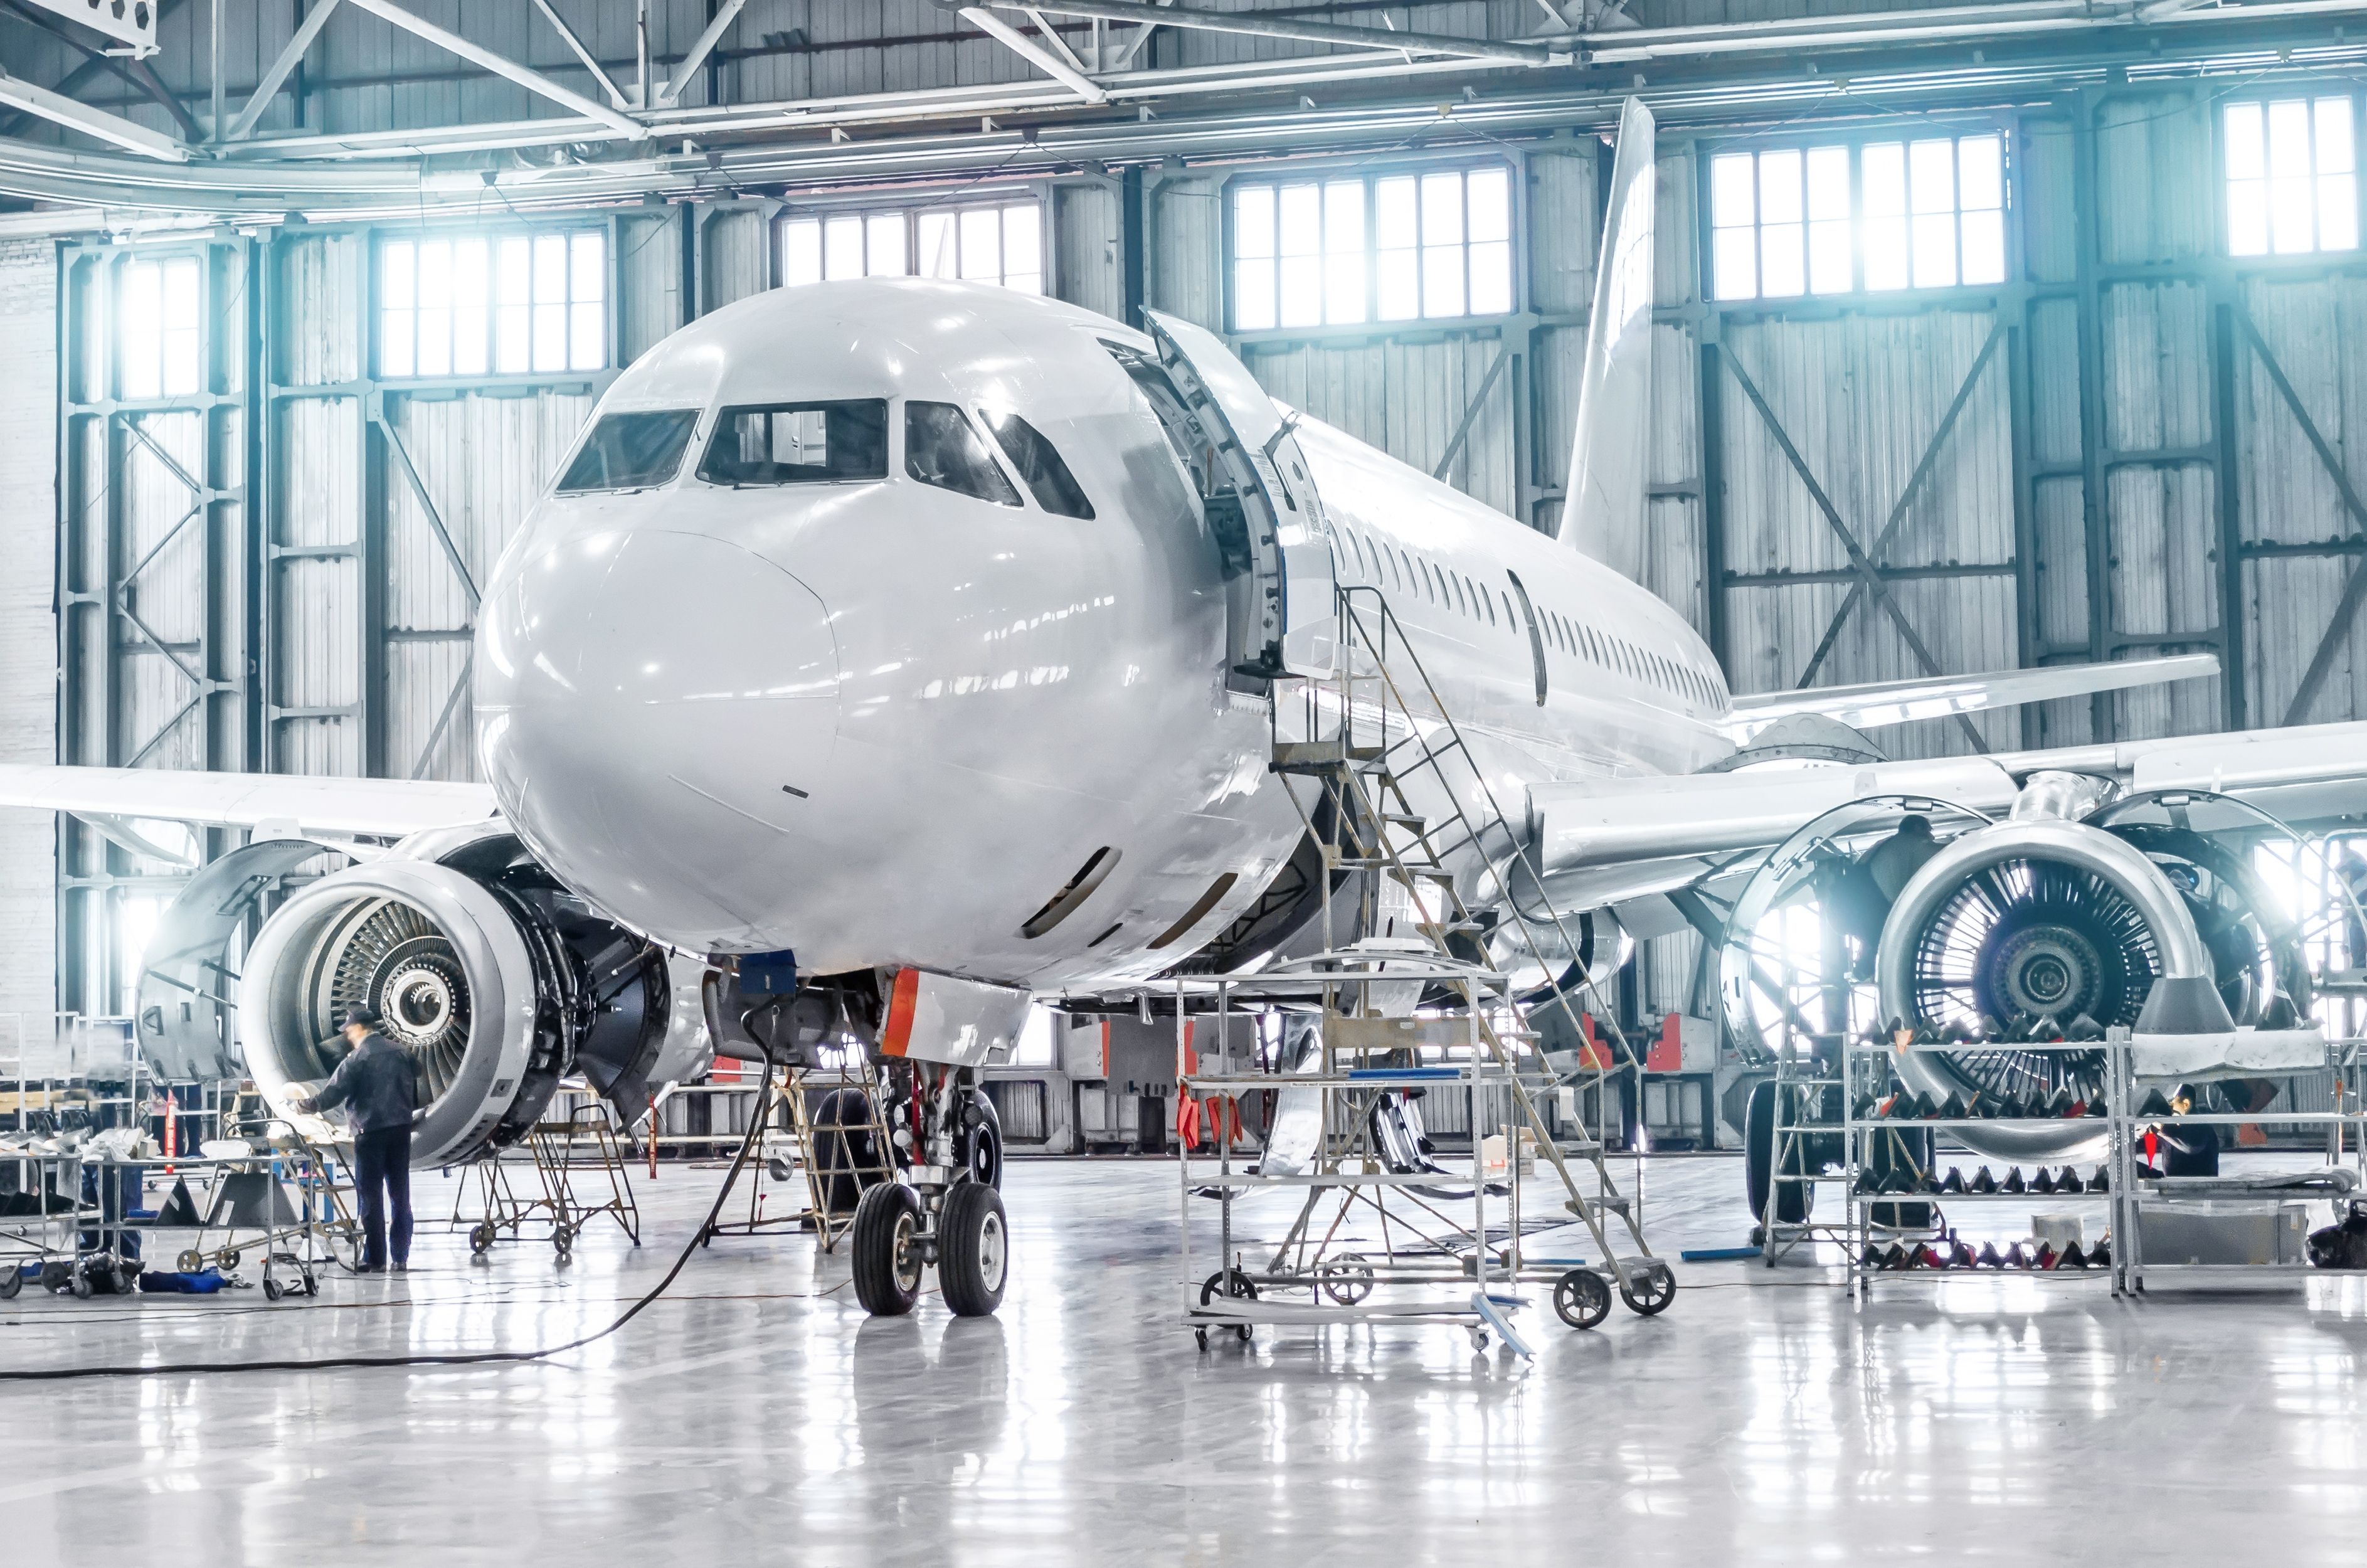 Where Are The World's Largest Aircraft Maintenance Facilities?